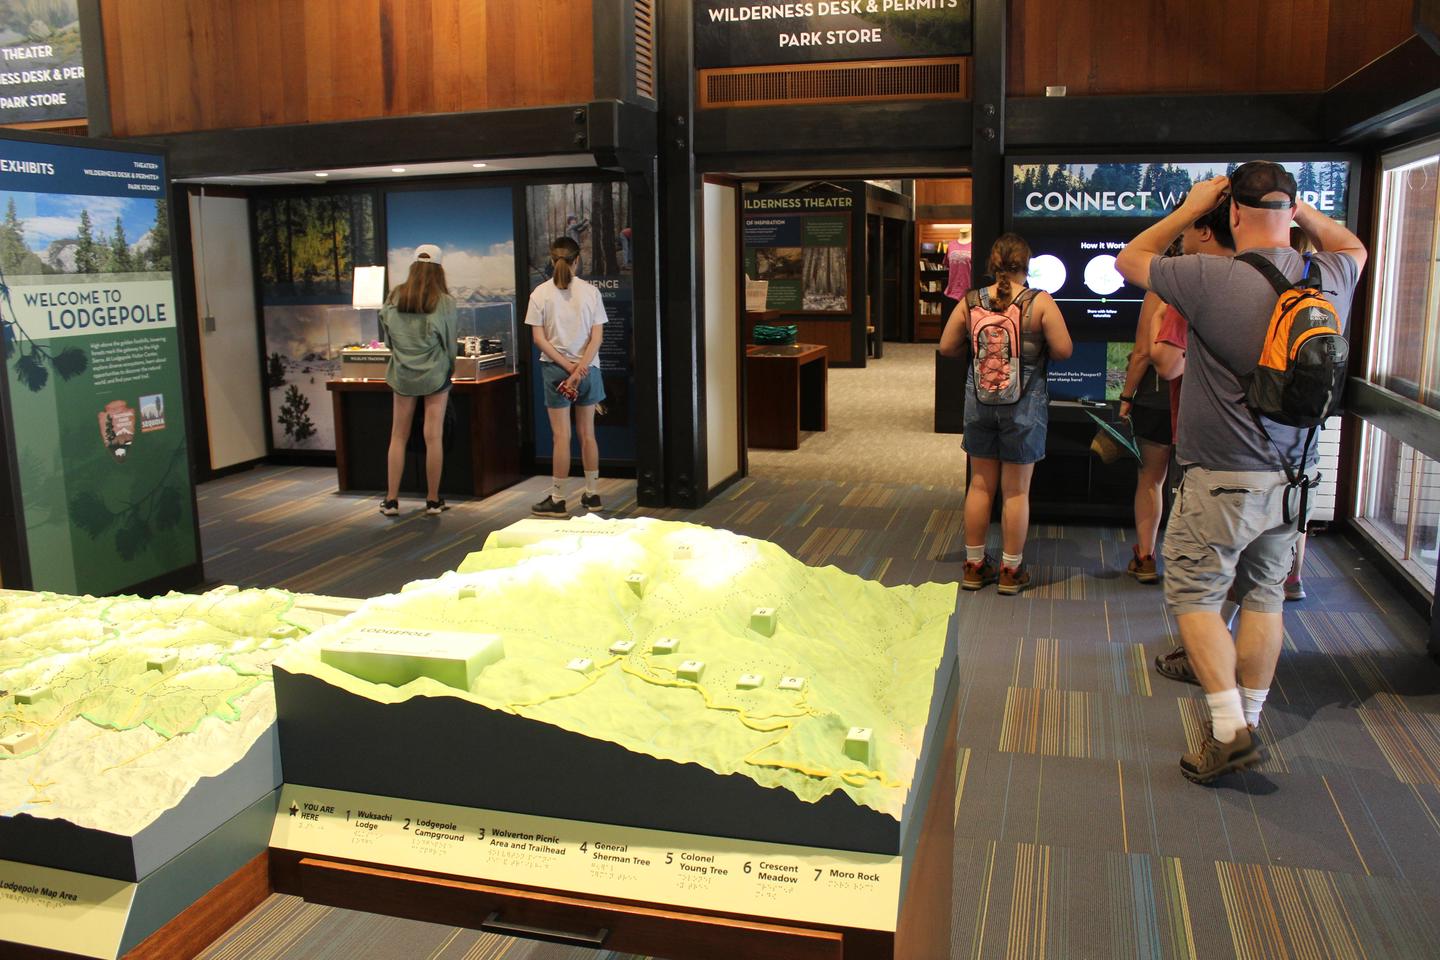 Lodgepole Visitor CenterVisitors take in the brand-new displays and maps at the Lodgepole Visitor Center